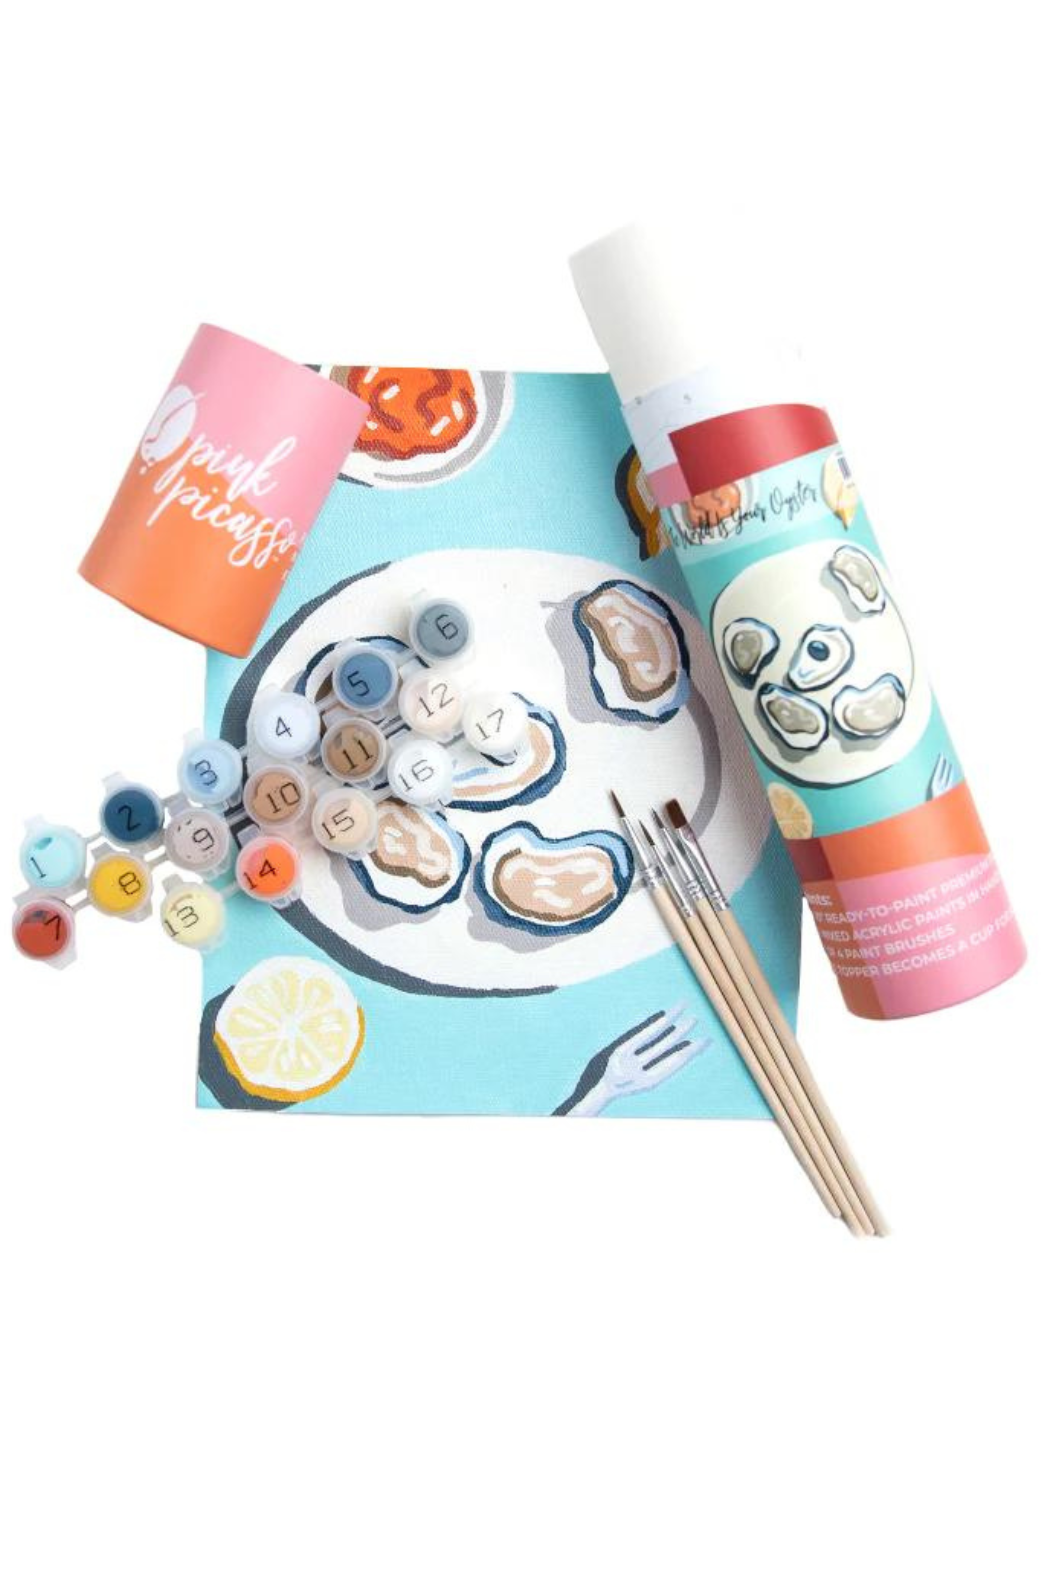 Best Paint by Numbers Kits, Be Bubbly